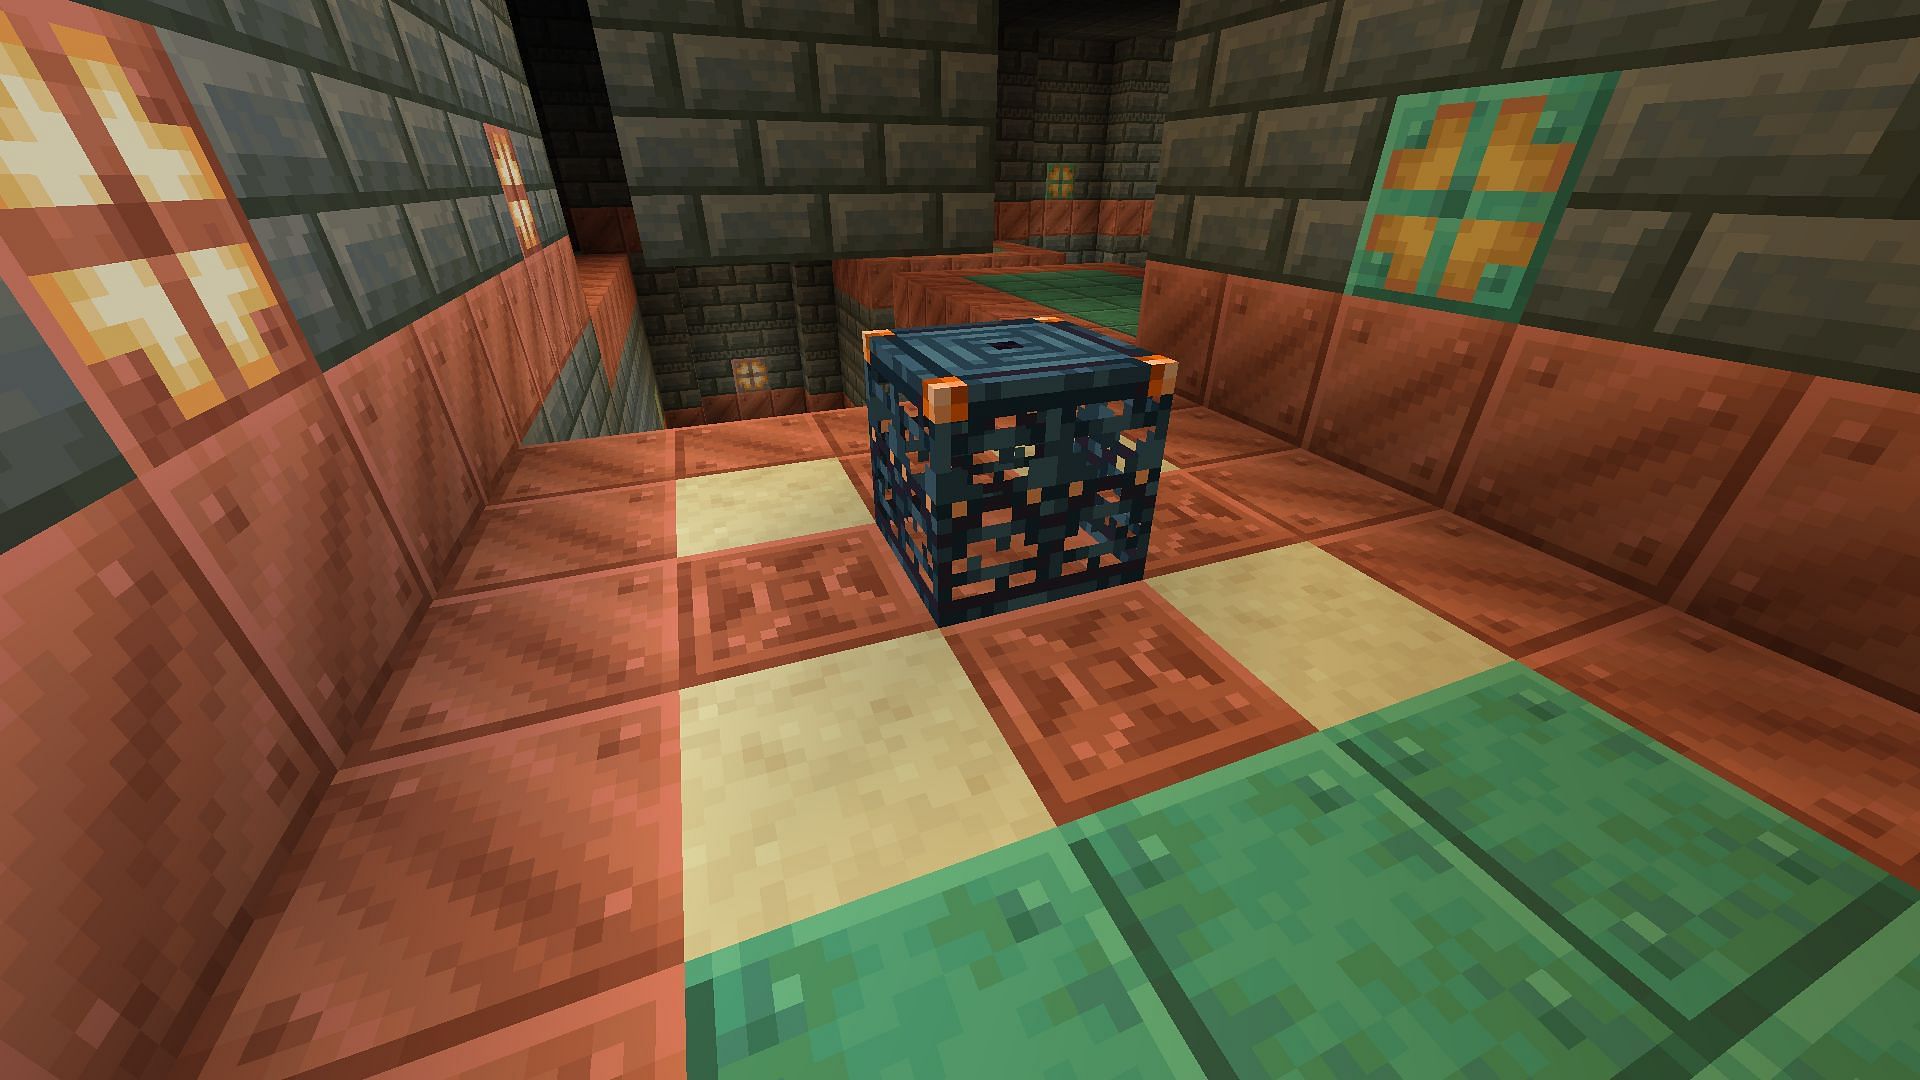 Trial spawners are generated in new trial chamber structures in Minecraft (Image via Mojang)